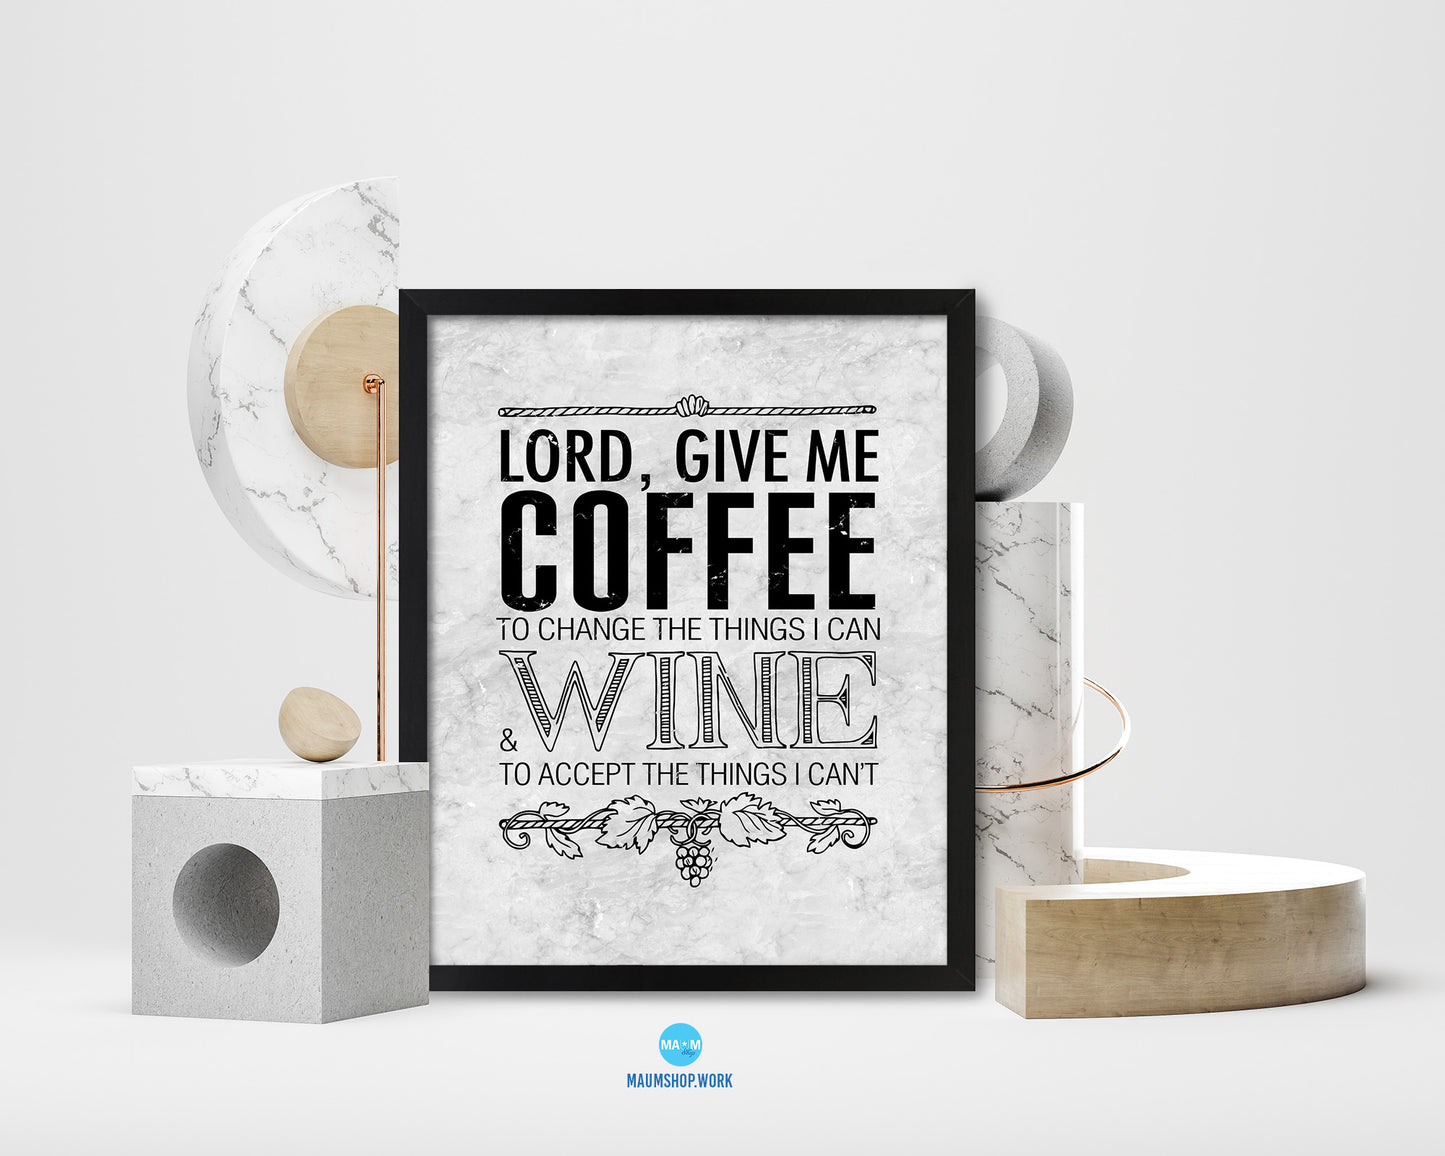 Lord, give me  coffee to change the things Bible Scripture Verse Framed Print Wall Art Decor Gifts